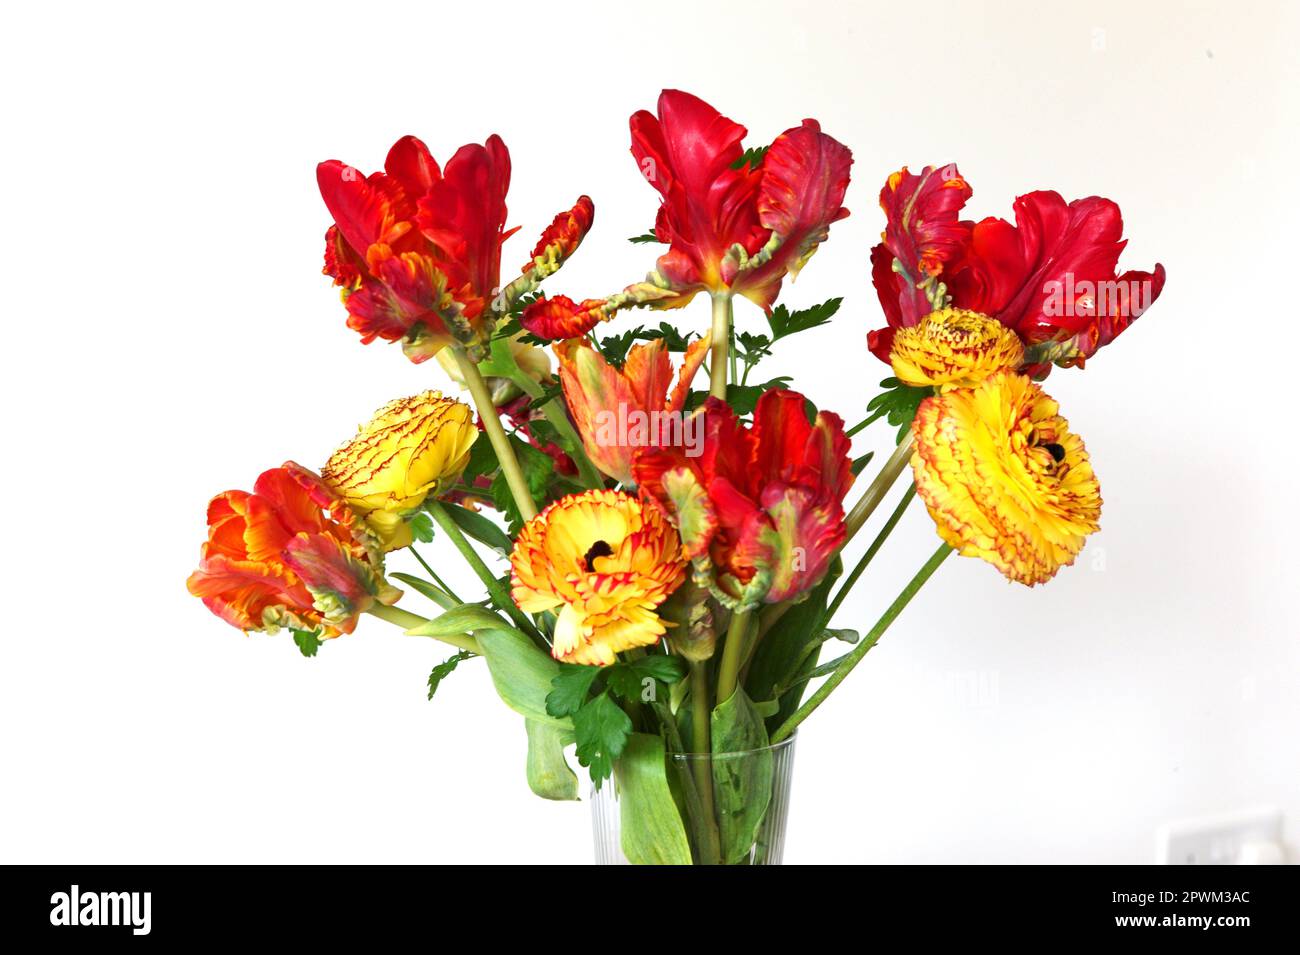 British grown cut flowers with parrot tulips and Ranunculus, UK Stock Photo